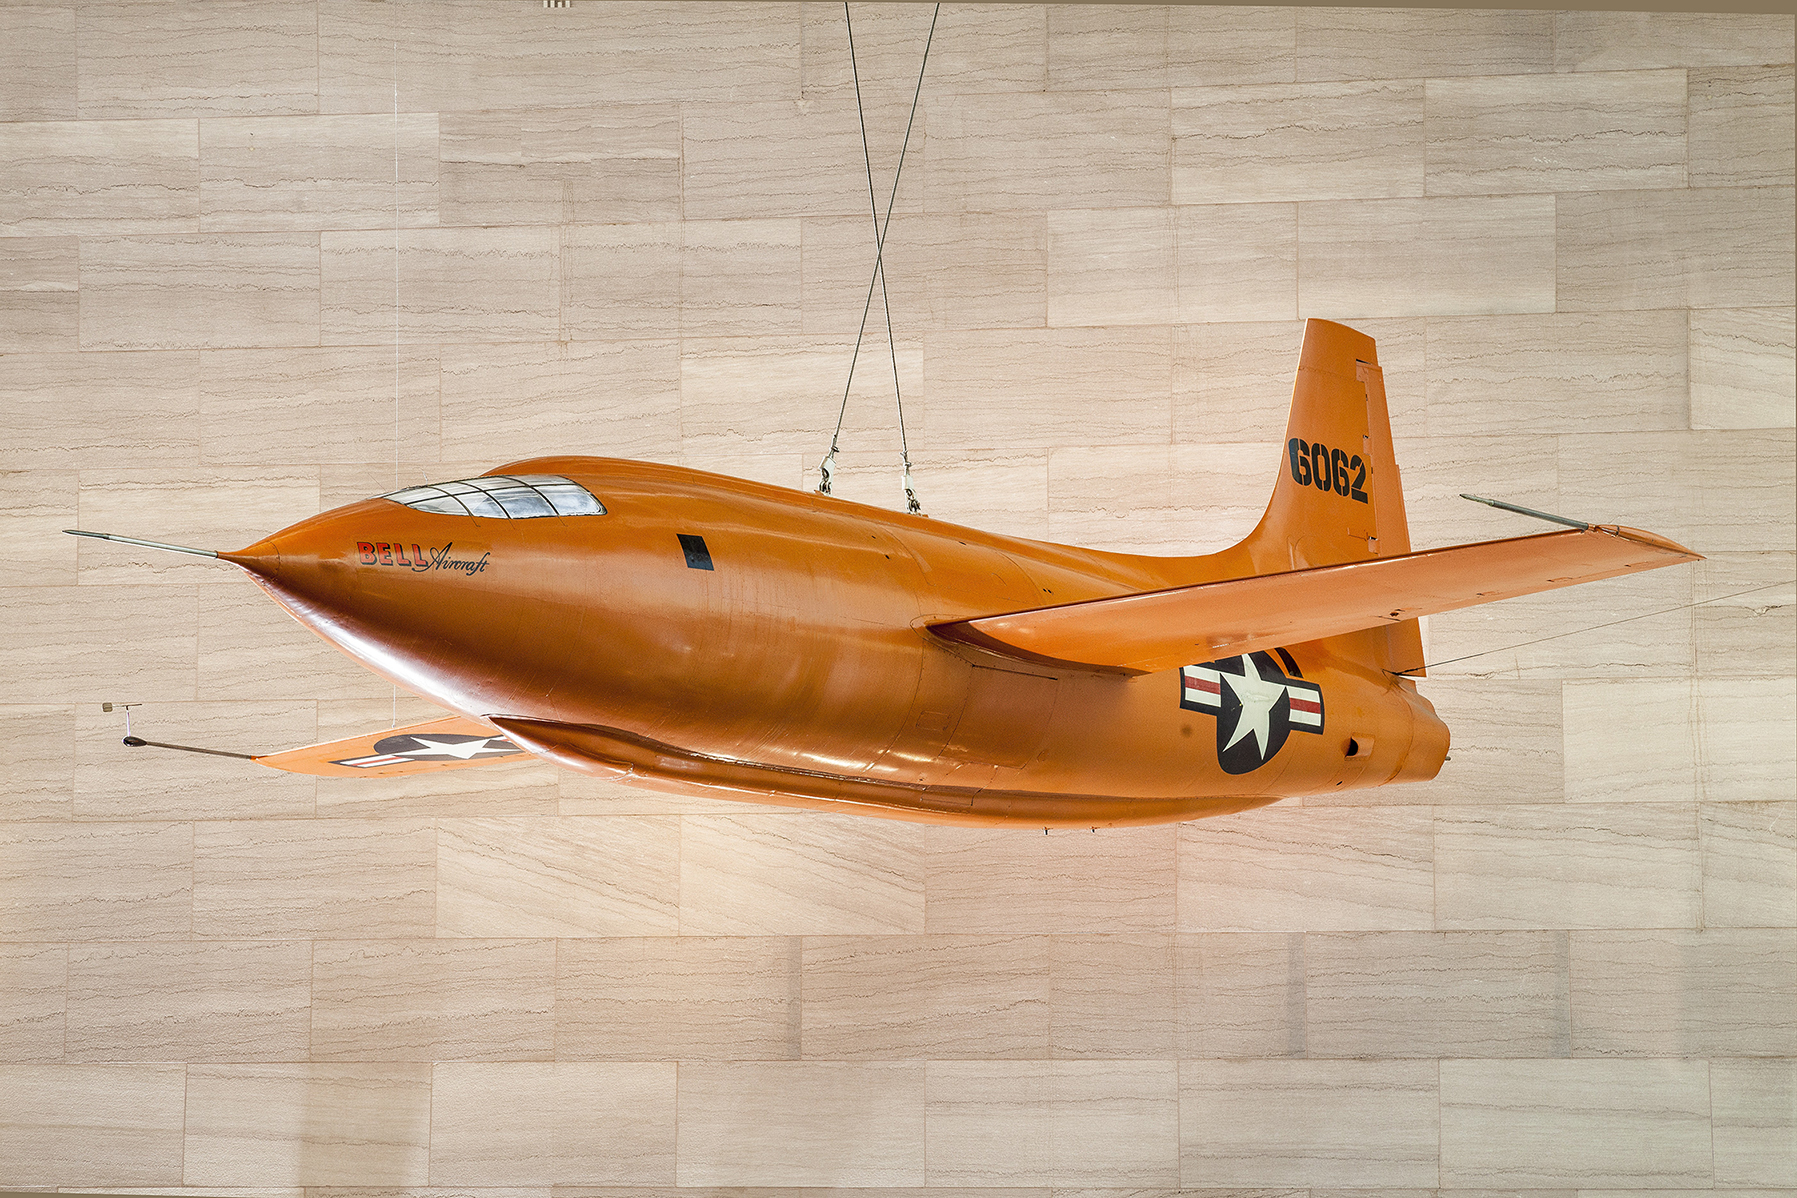 The Bell X-1 suspended from the ceiling of the National Air and Space Museum's main gallery in Washington, DC.